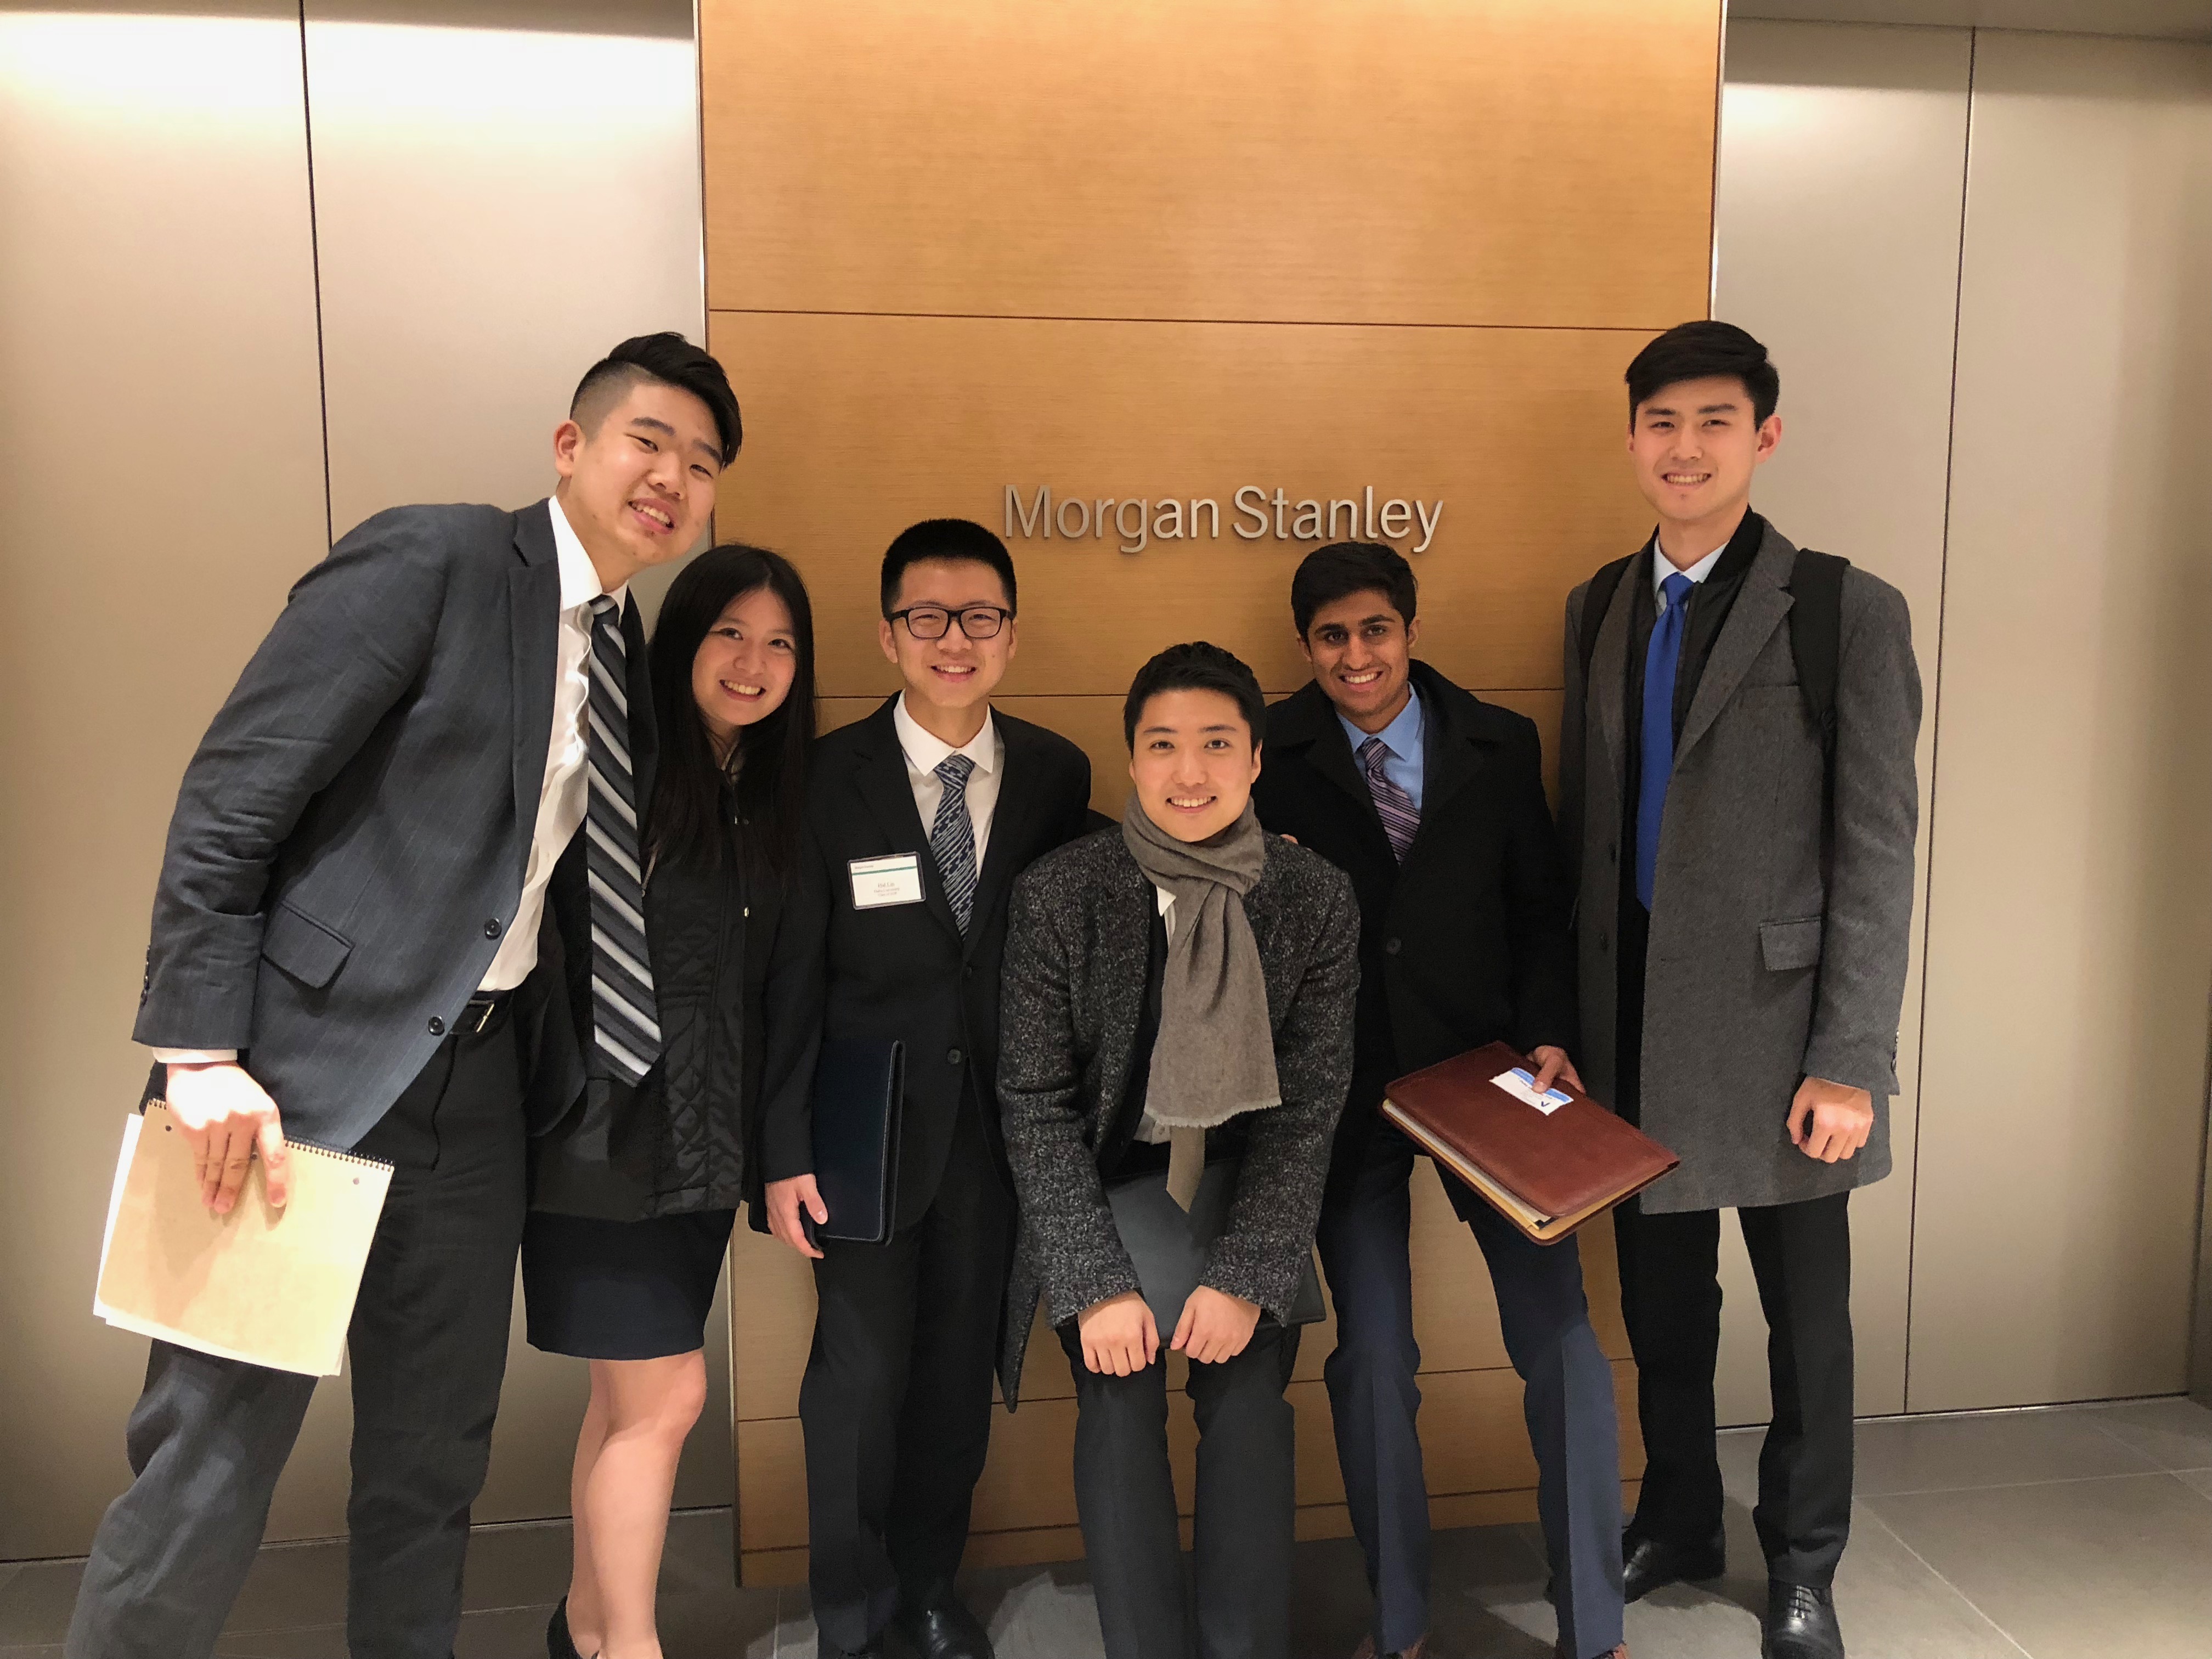 A site visit to Morgan Stanley